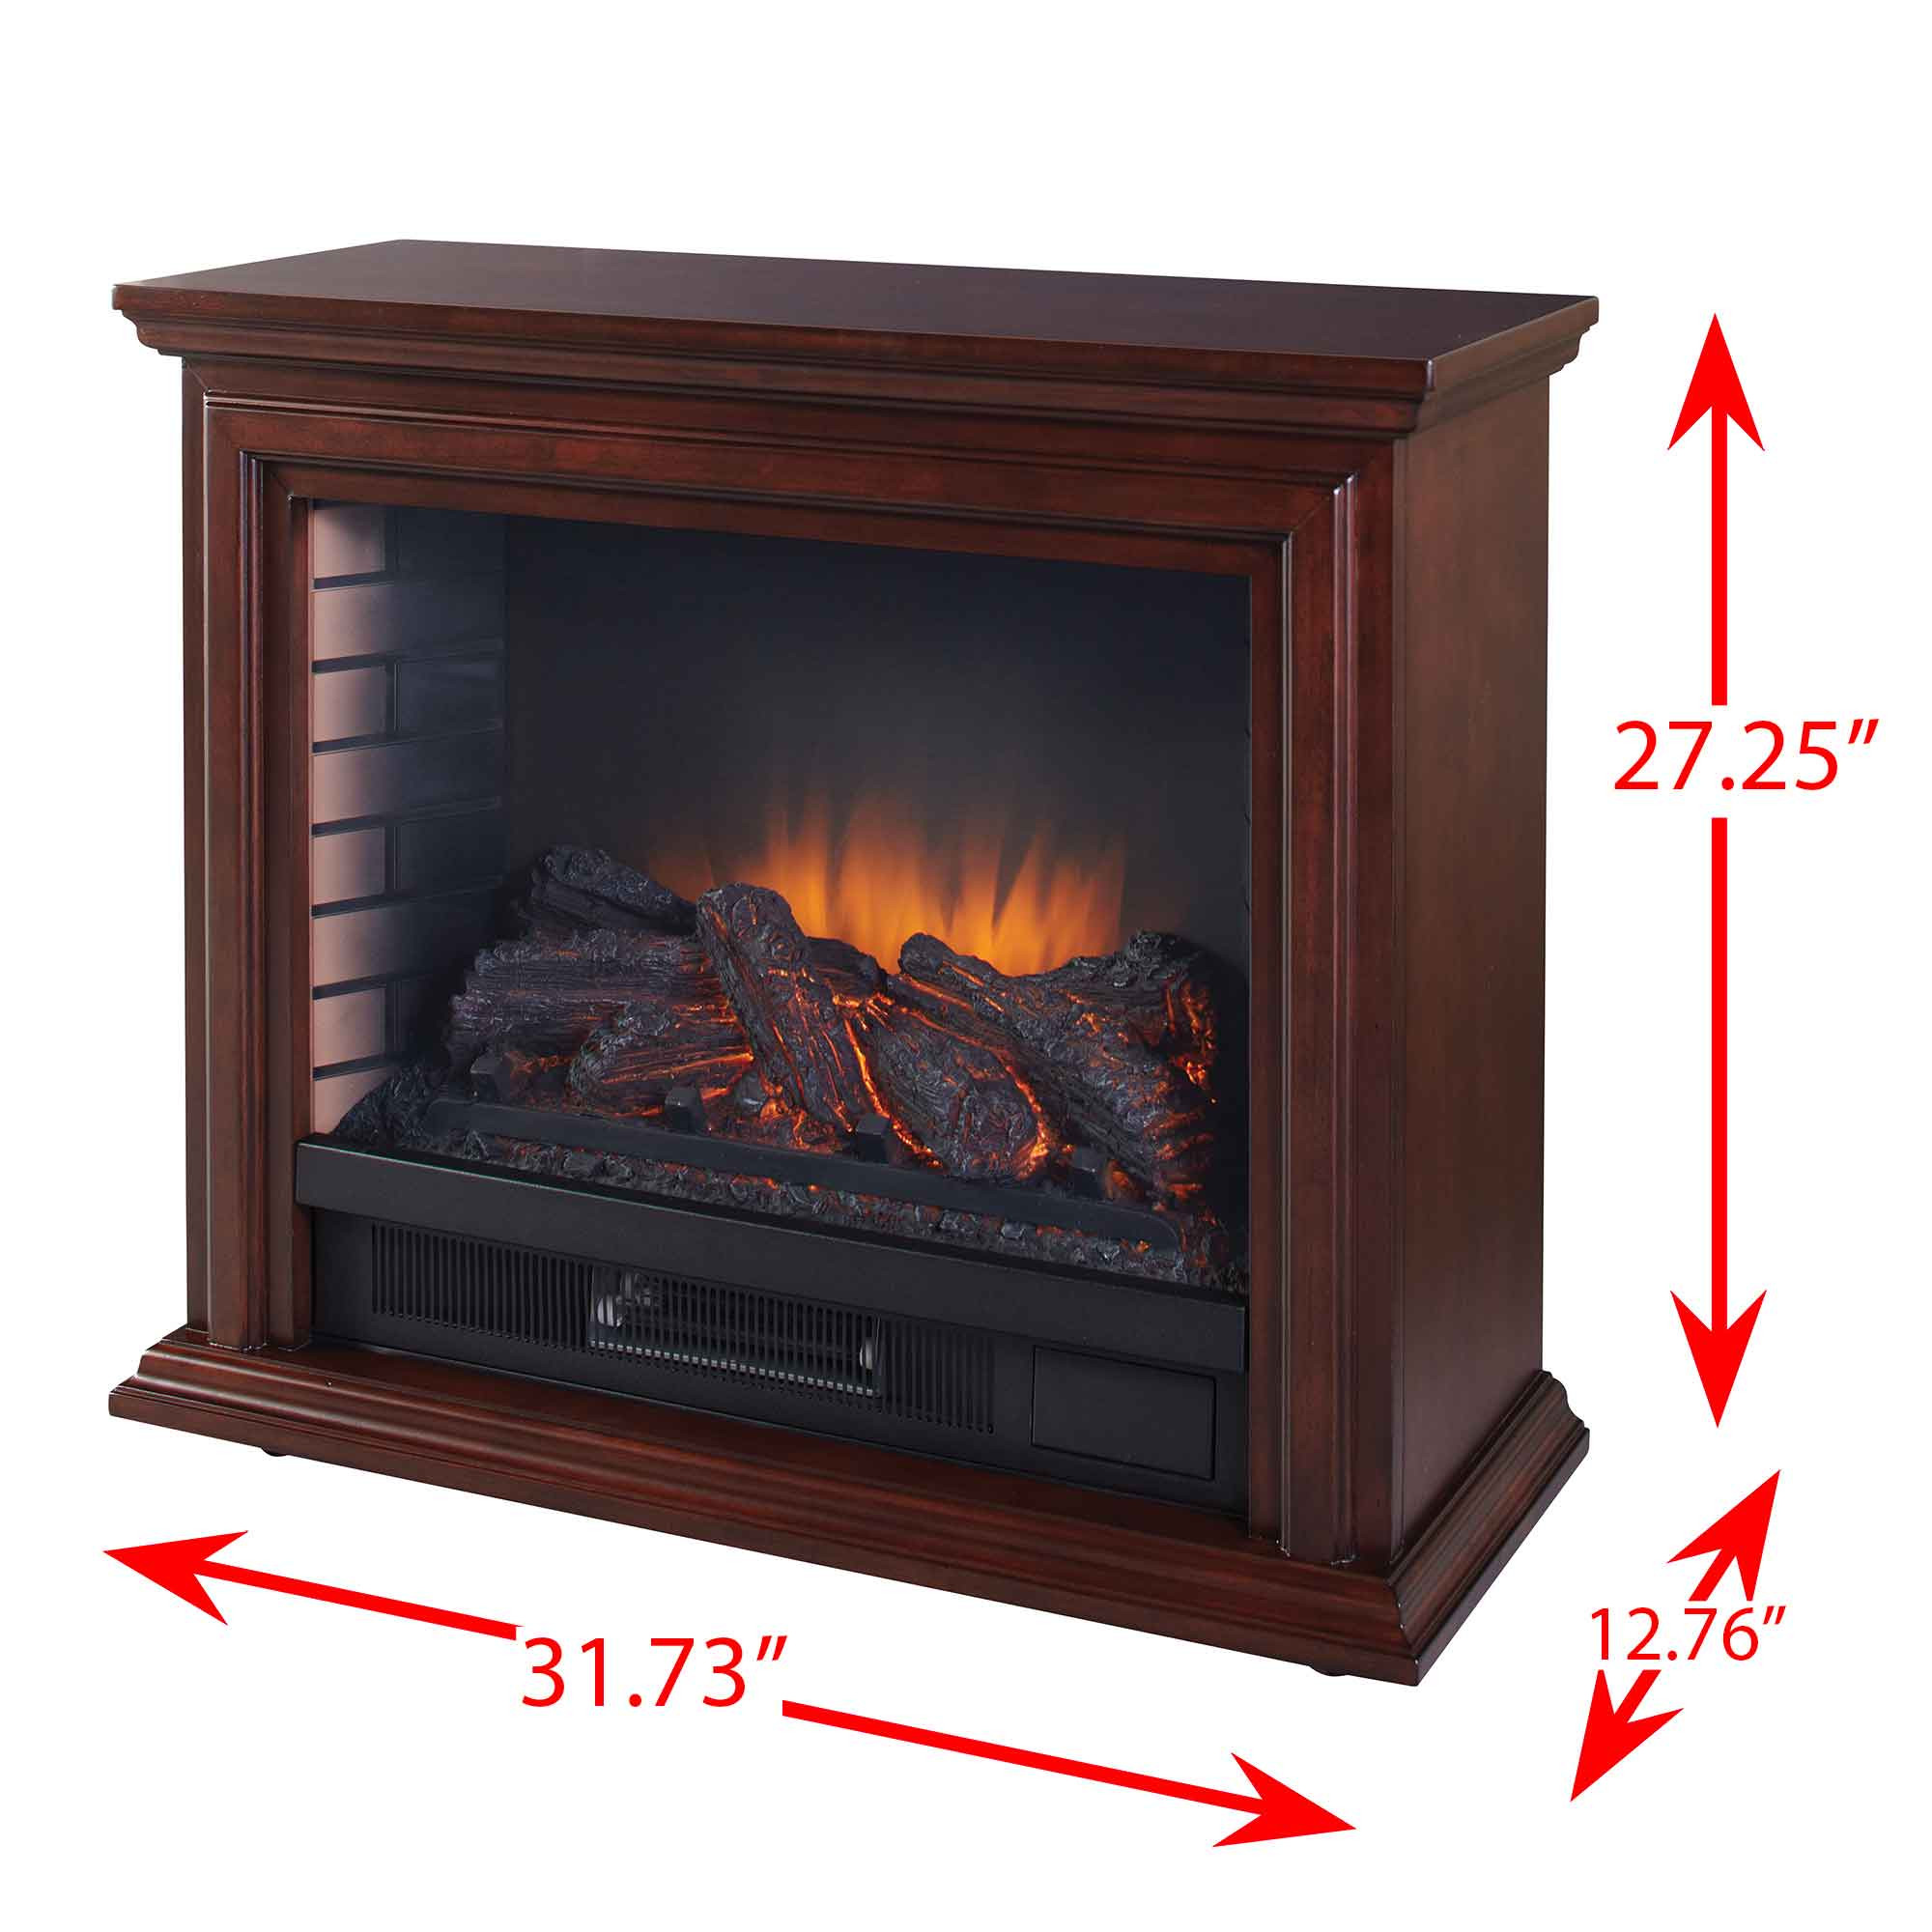 Electric Fireplace Entertainment Center Lowes
 Ideas Best Electric Fireplaces At Lowes For Living Room